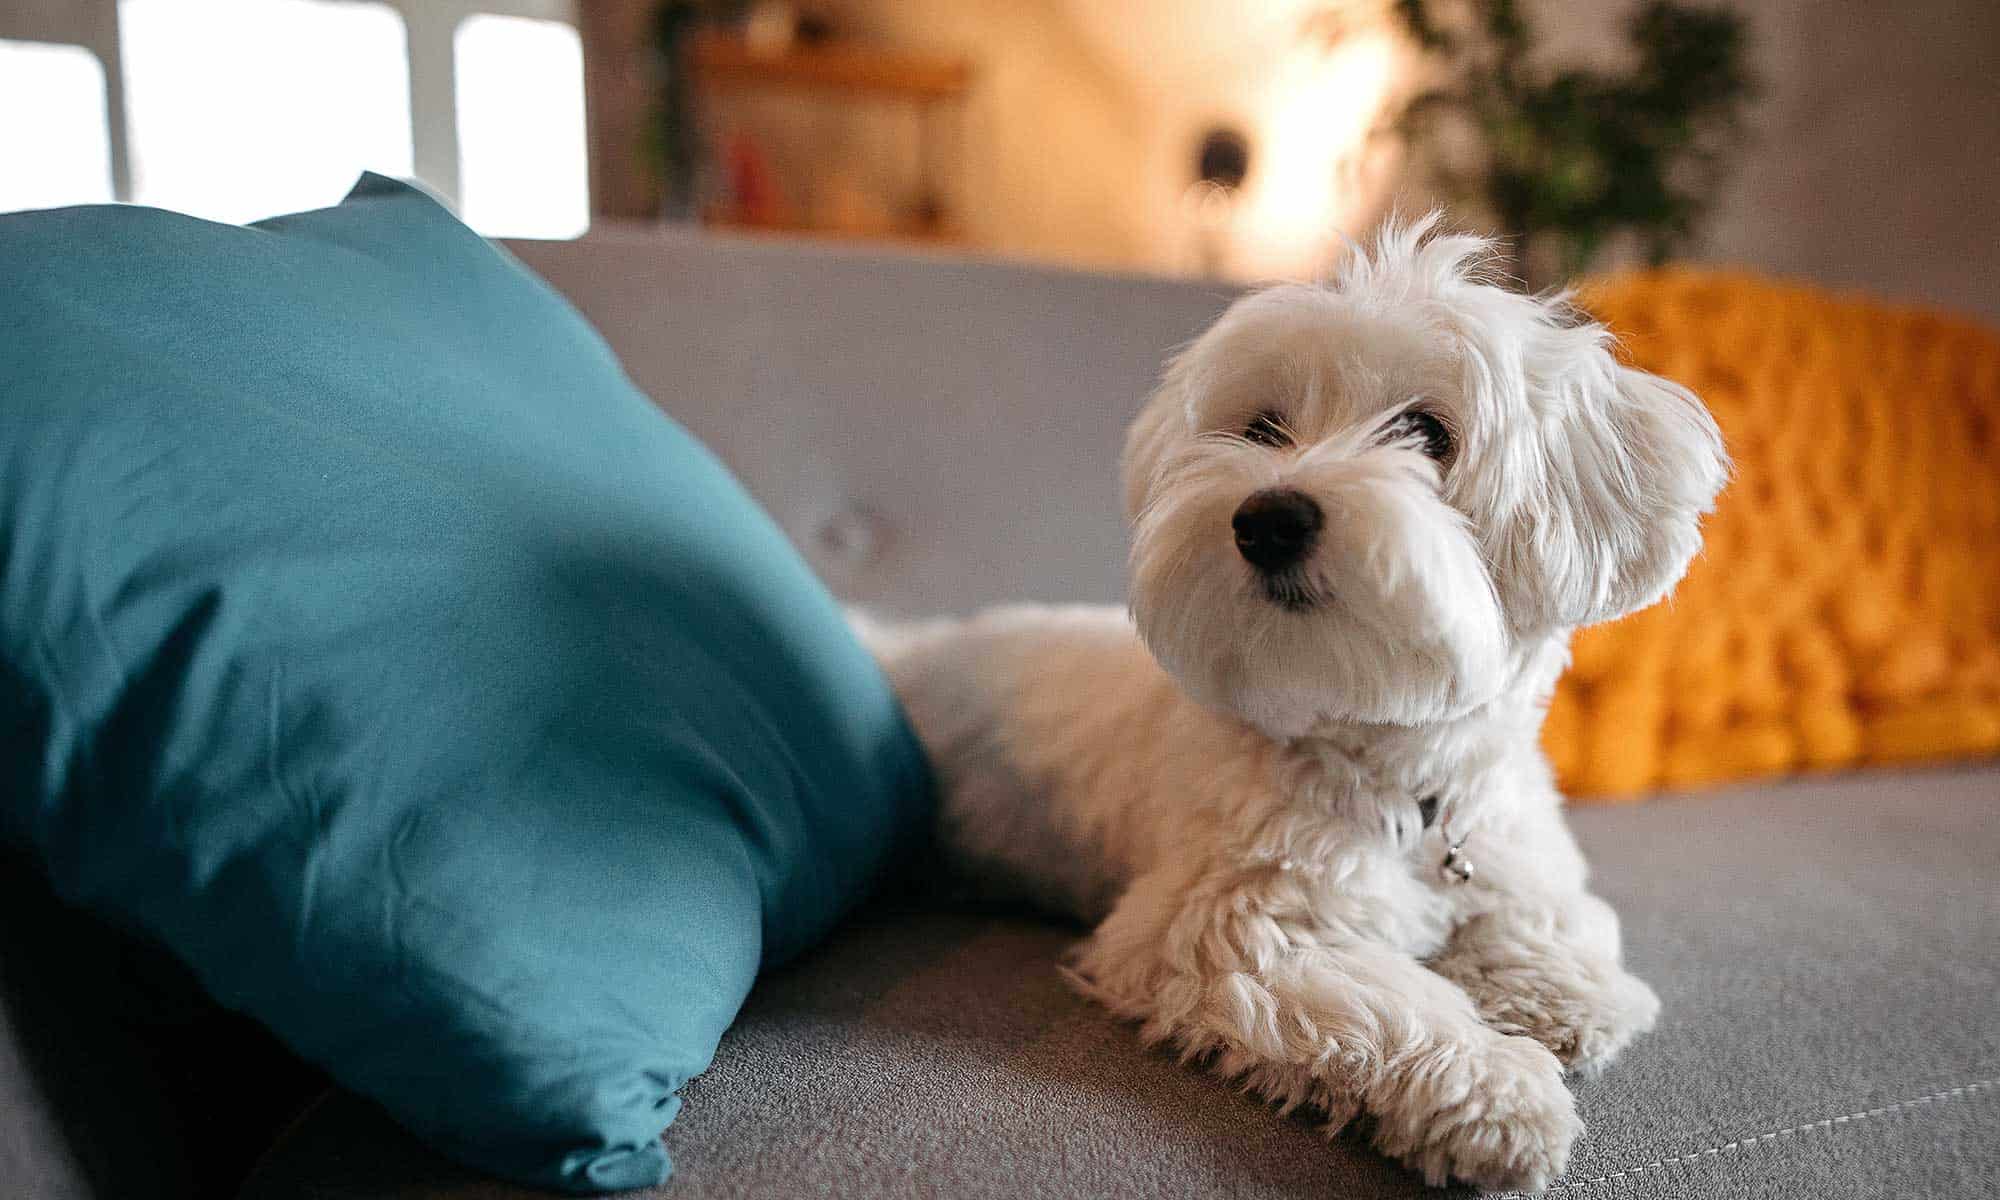 A puppy on a couch